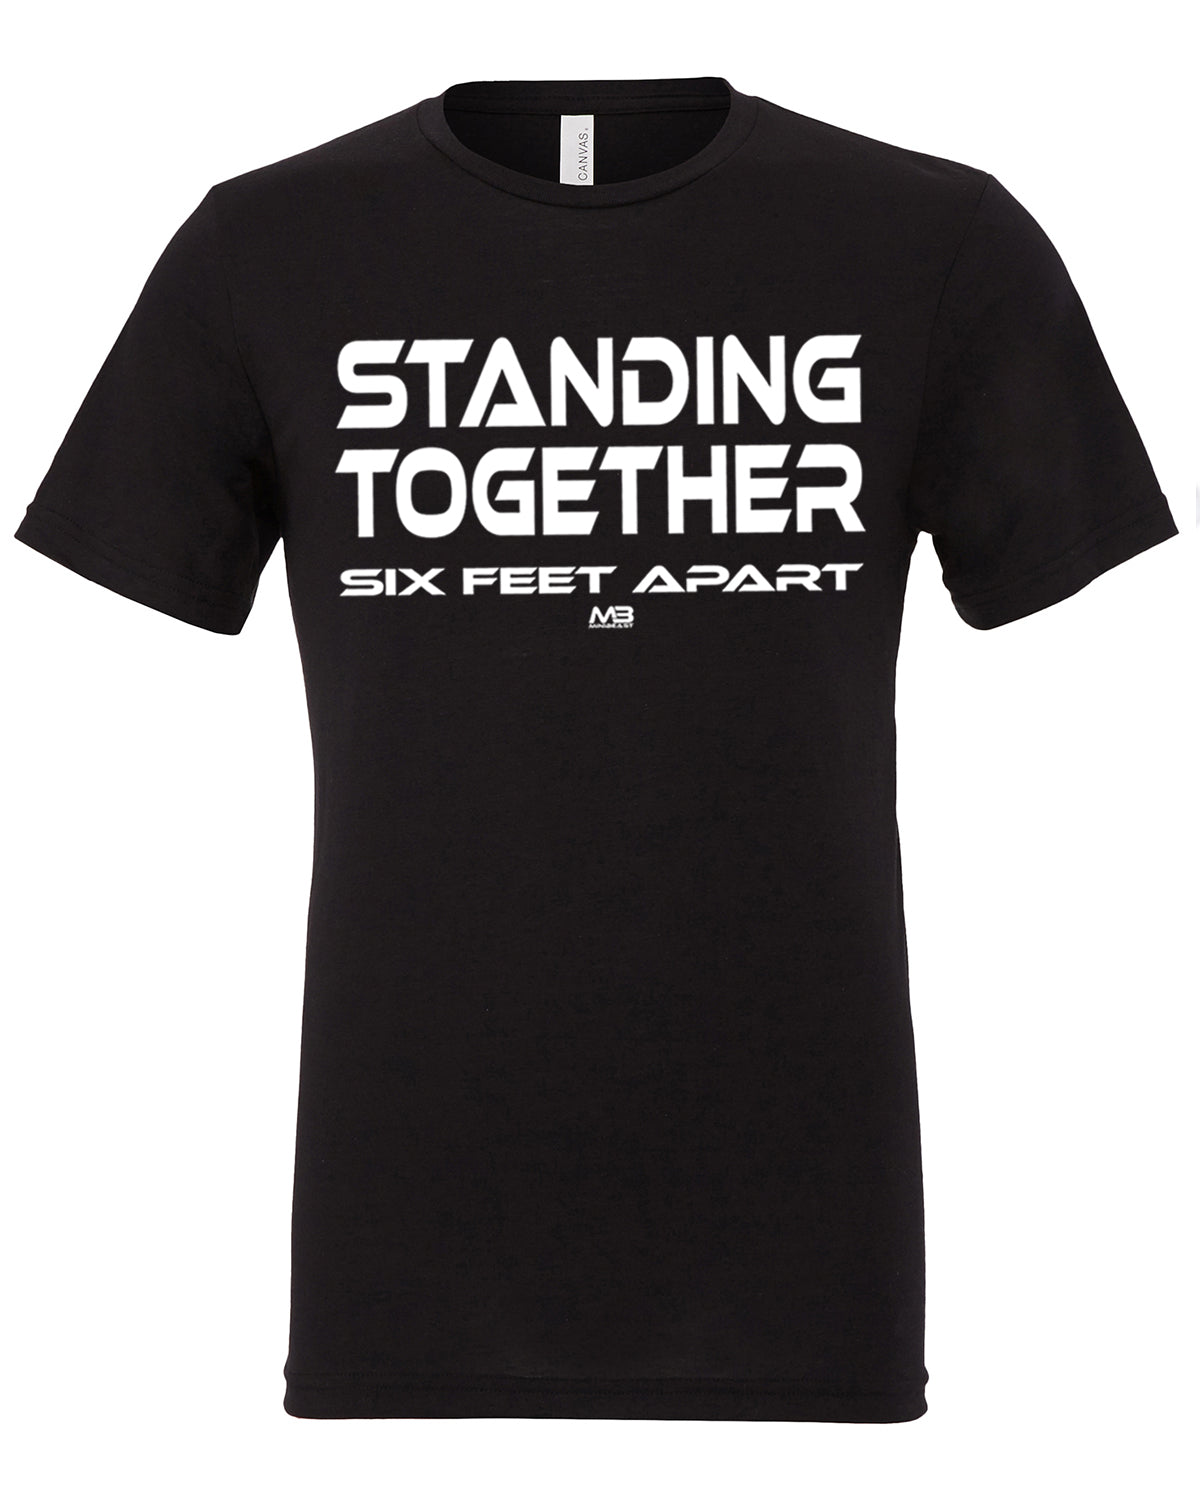 Unisex "Standing Together" Tee